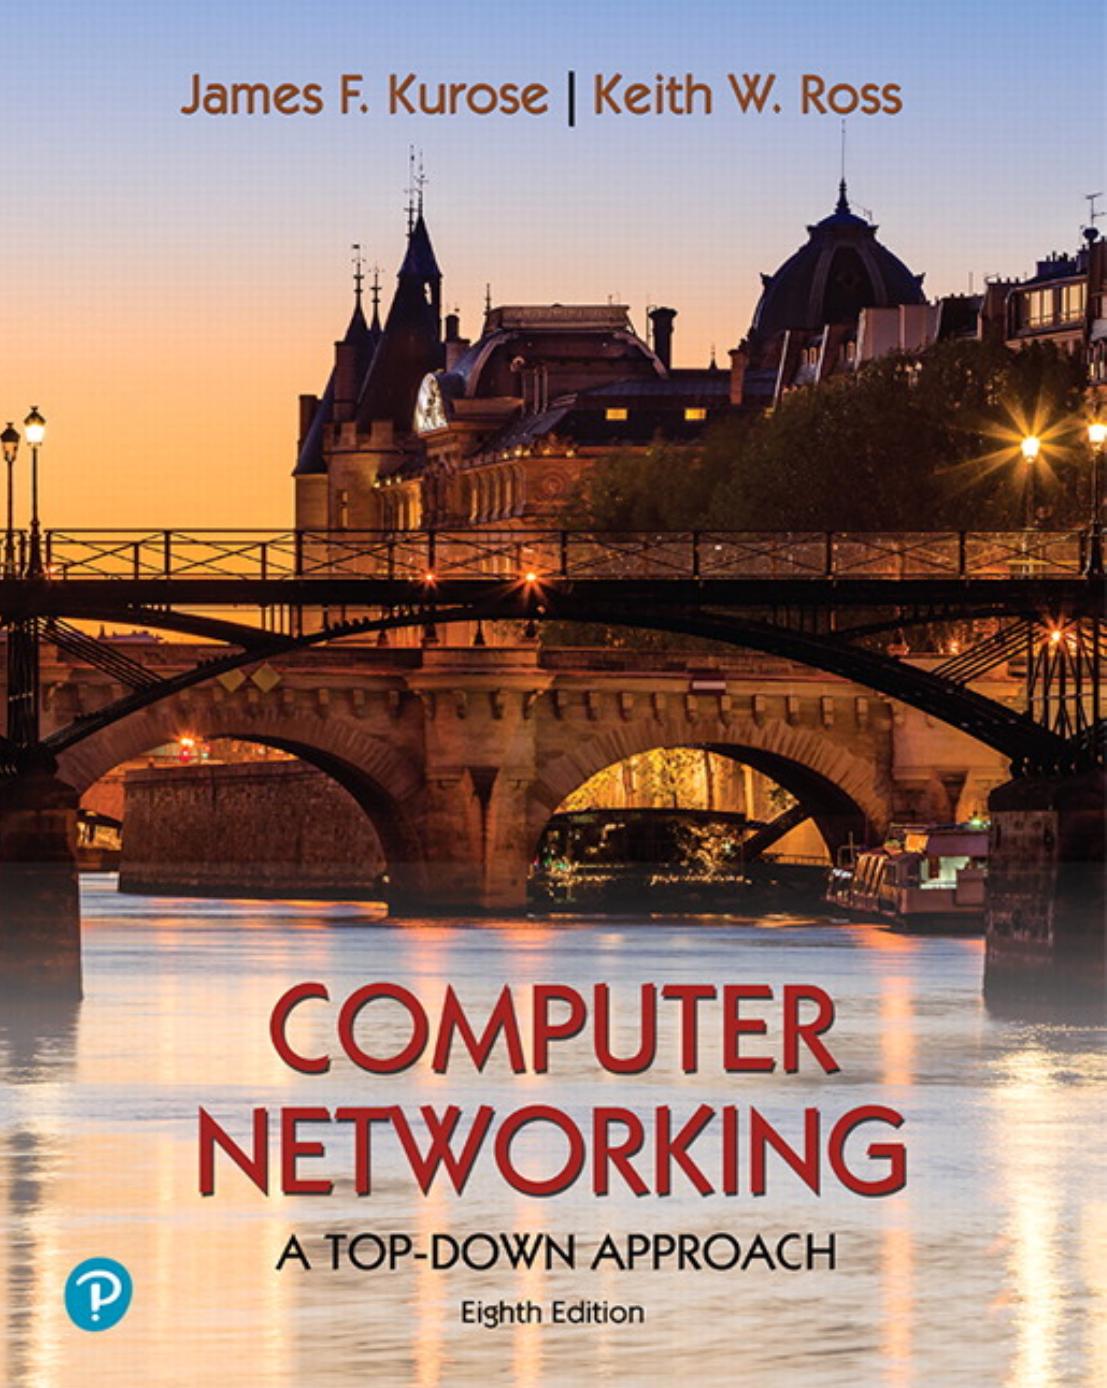 Computer Networking A Top-Down Approach 8th Edition by James Kurose; Keith Ross